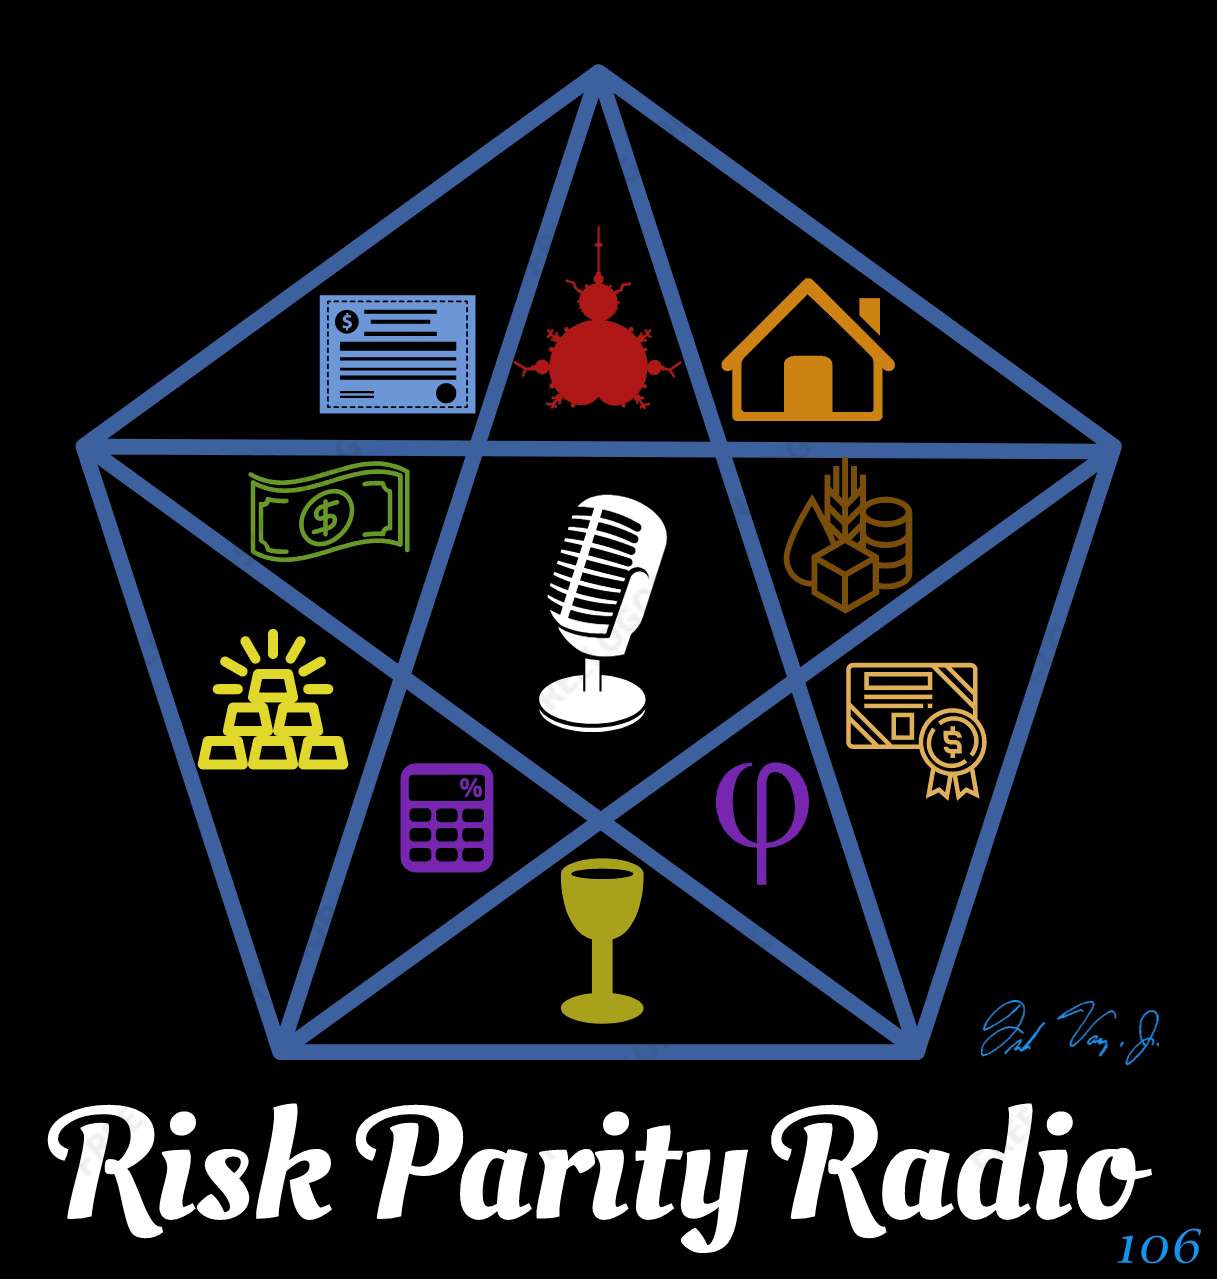 Limited Edition Risk Parity Radio Autographed Print #106